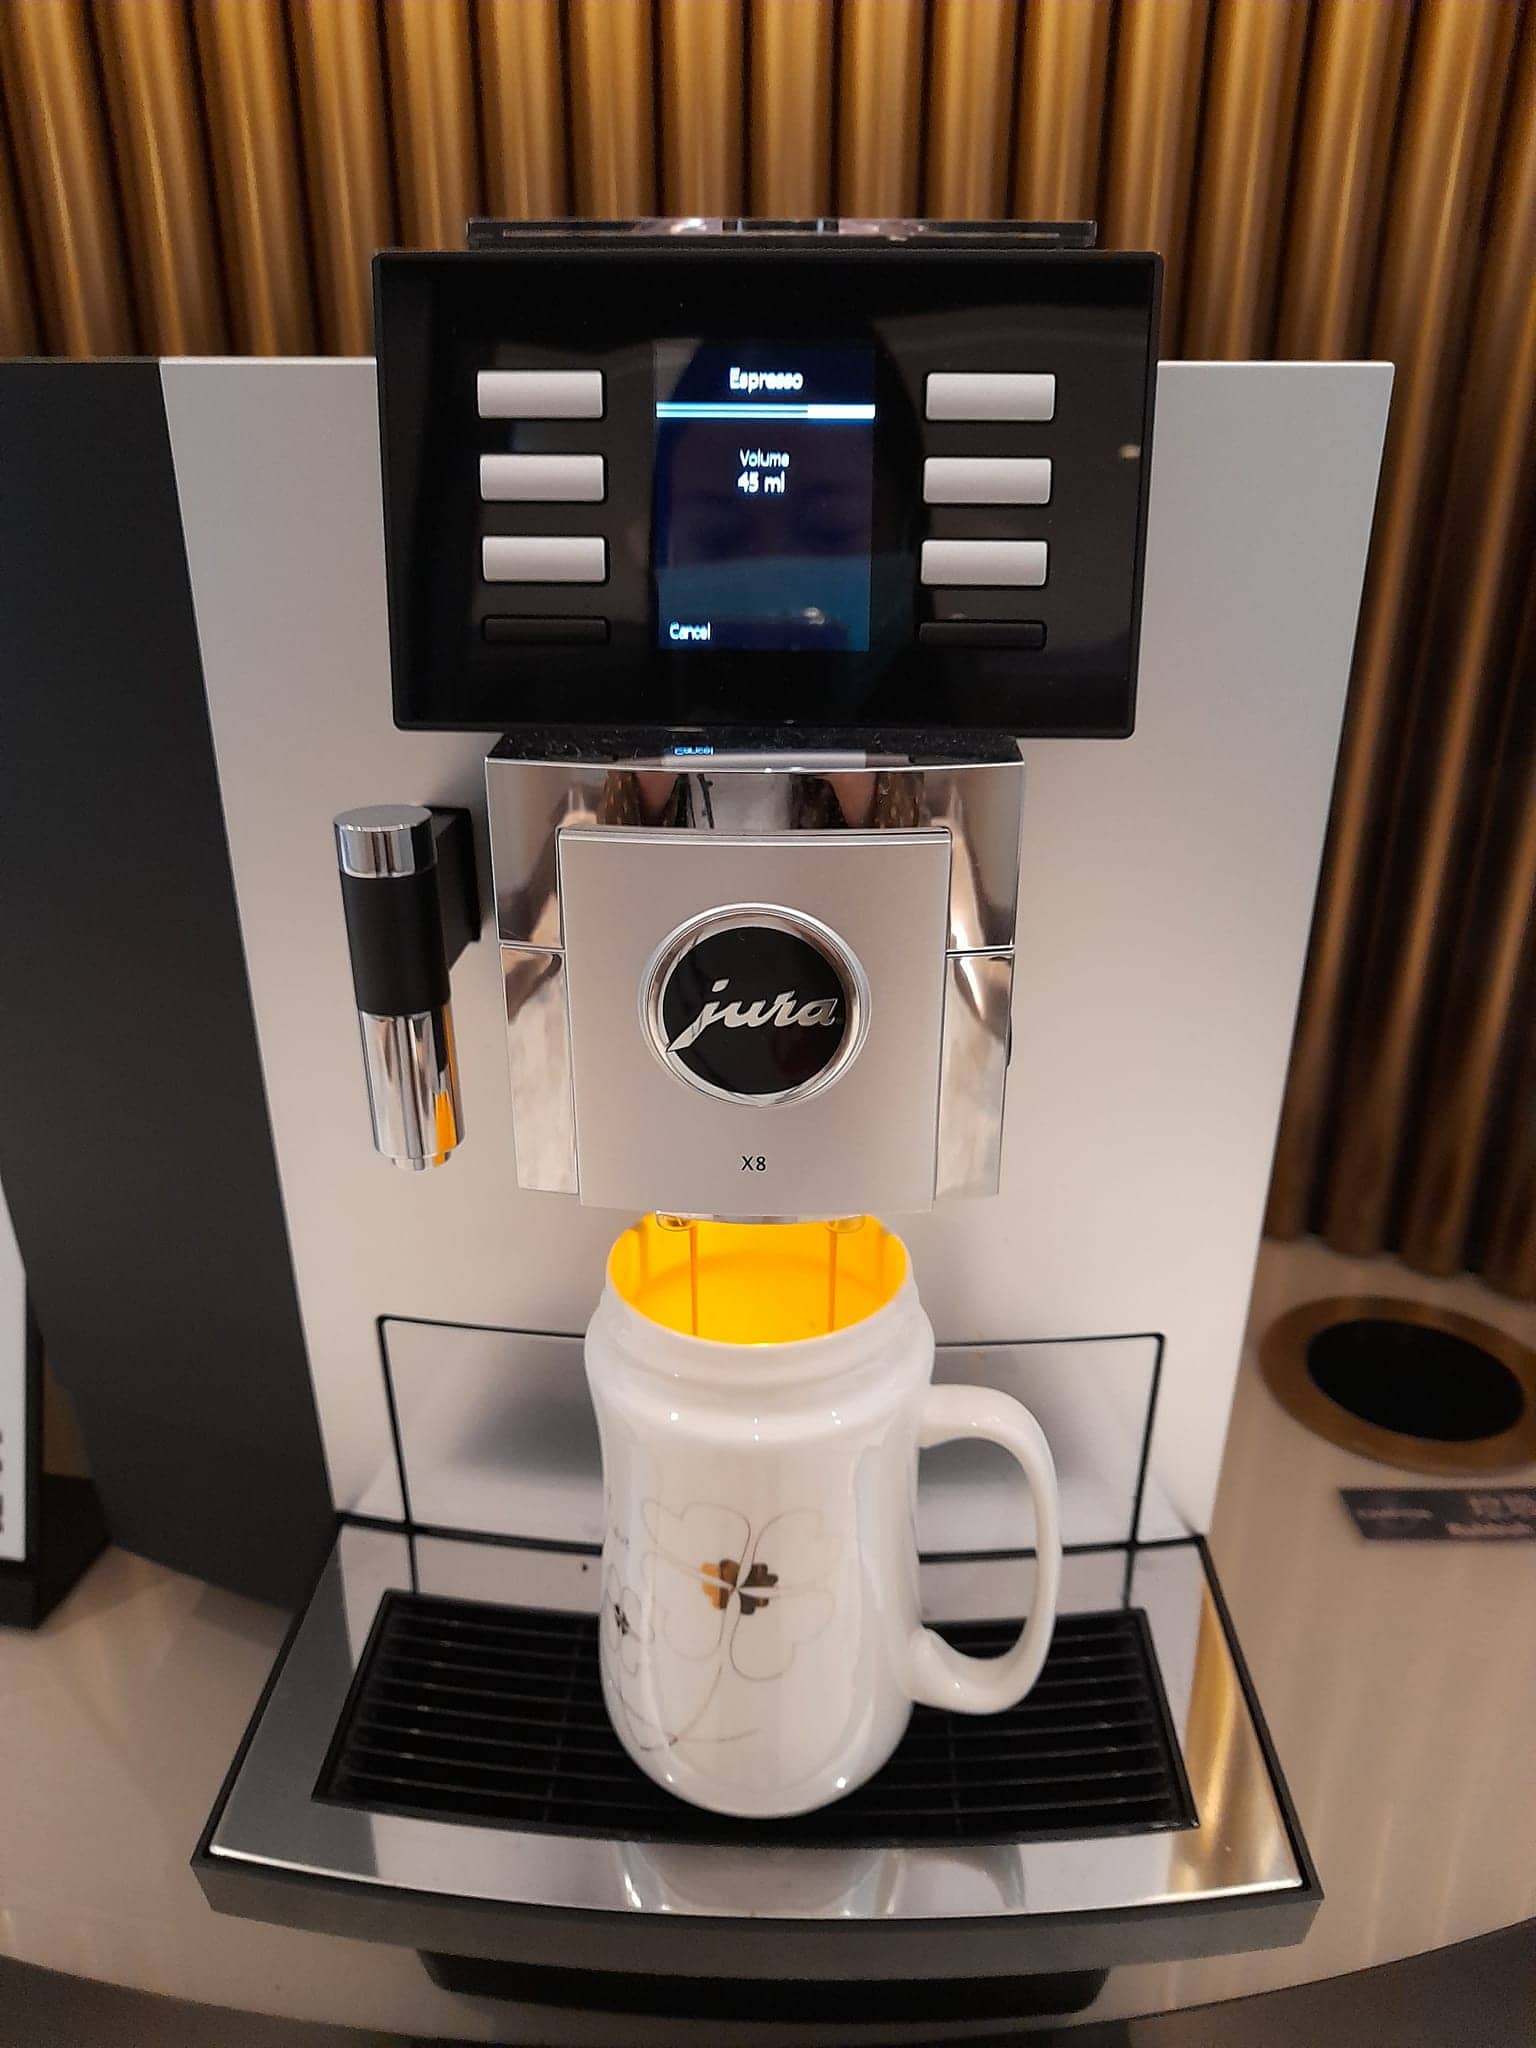 Jura X8 offers 21 beverages and a bigger water tank